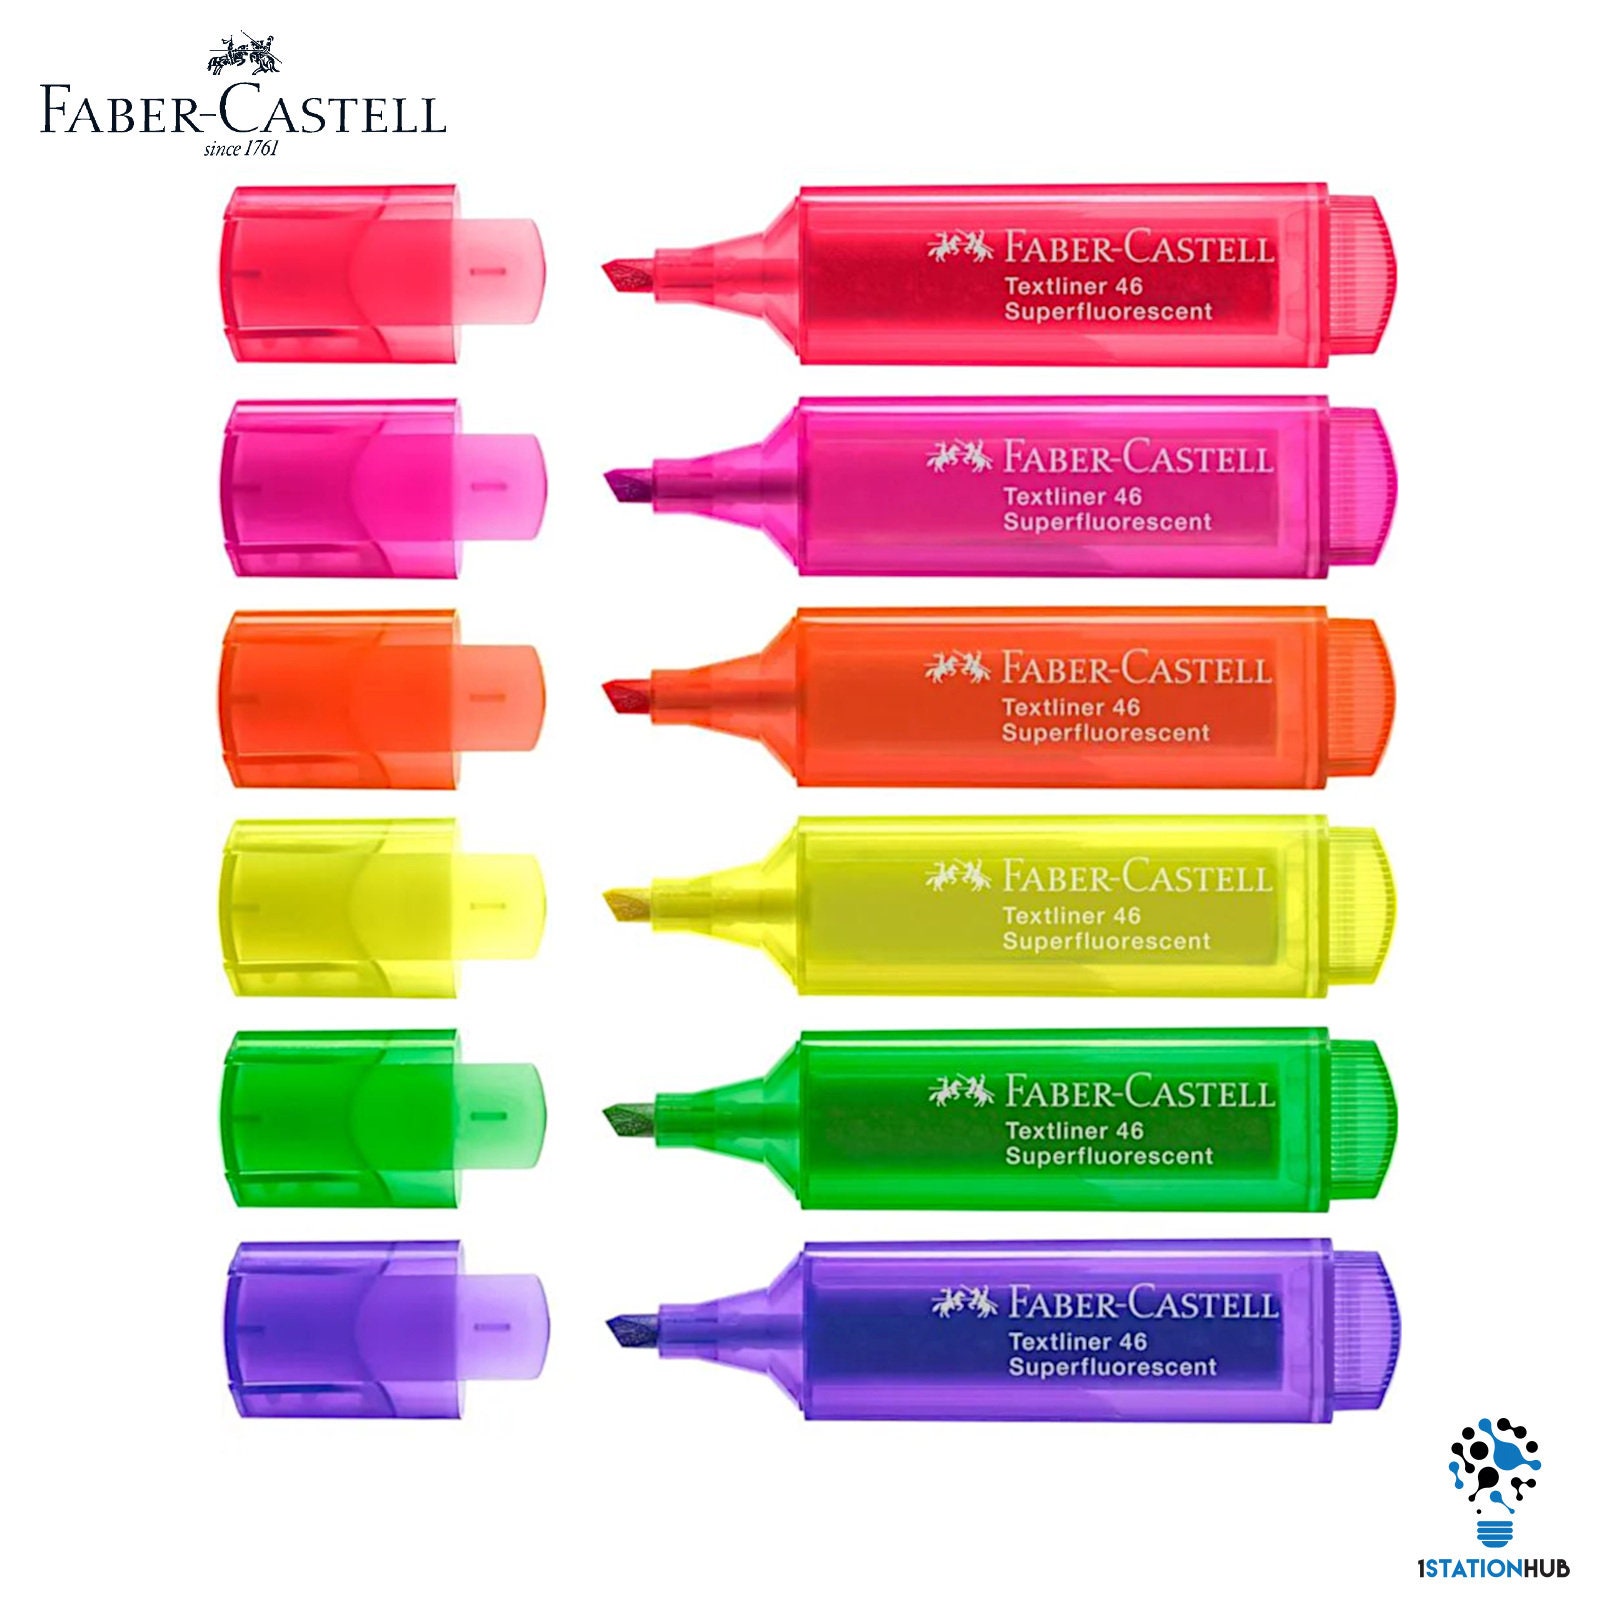 Expositor 30 marcadores Faber Castell Textliner 1546